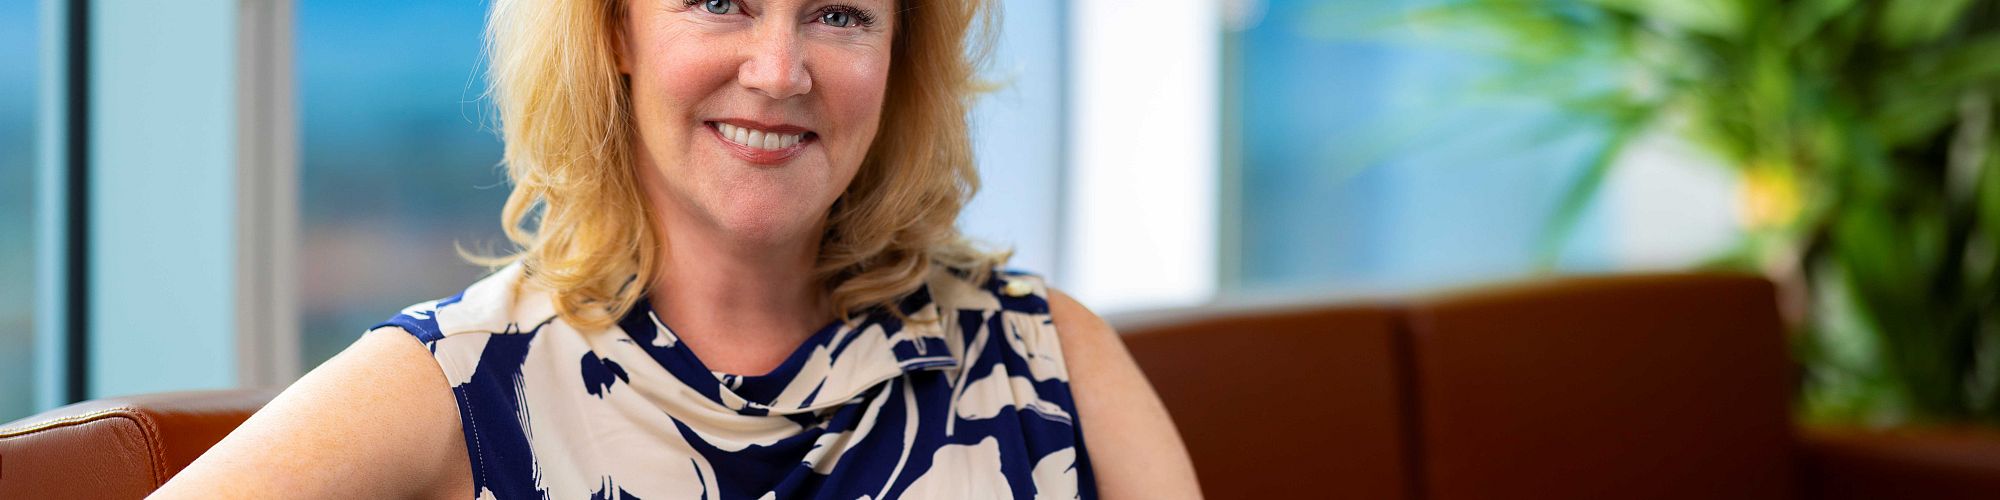 Stober Group appoints Lisa Lock as new Chief Executive Officer